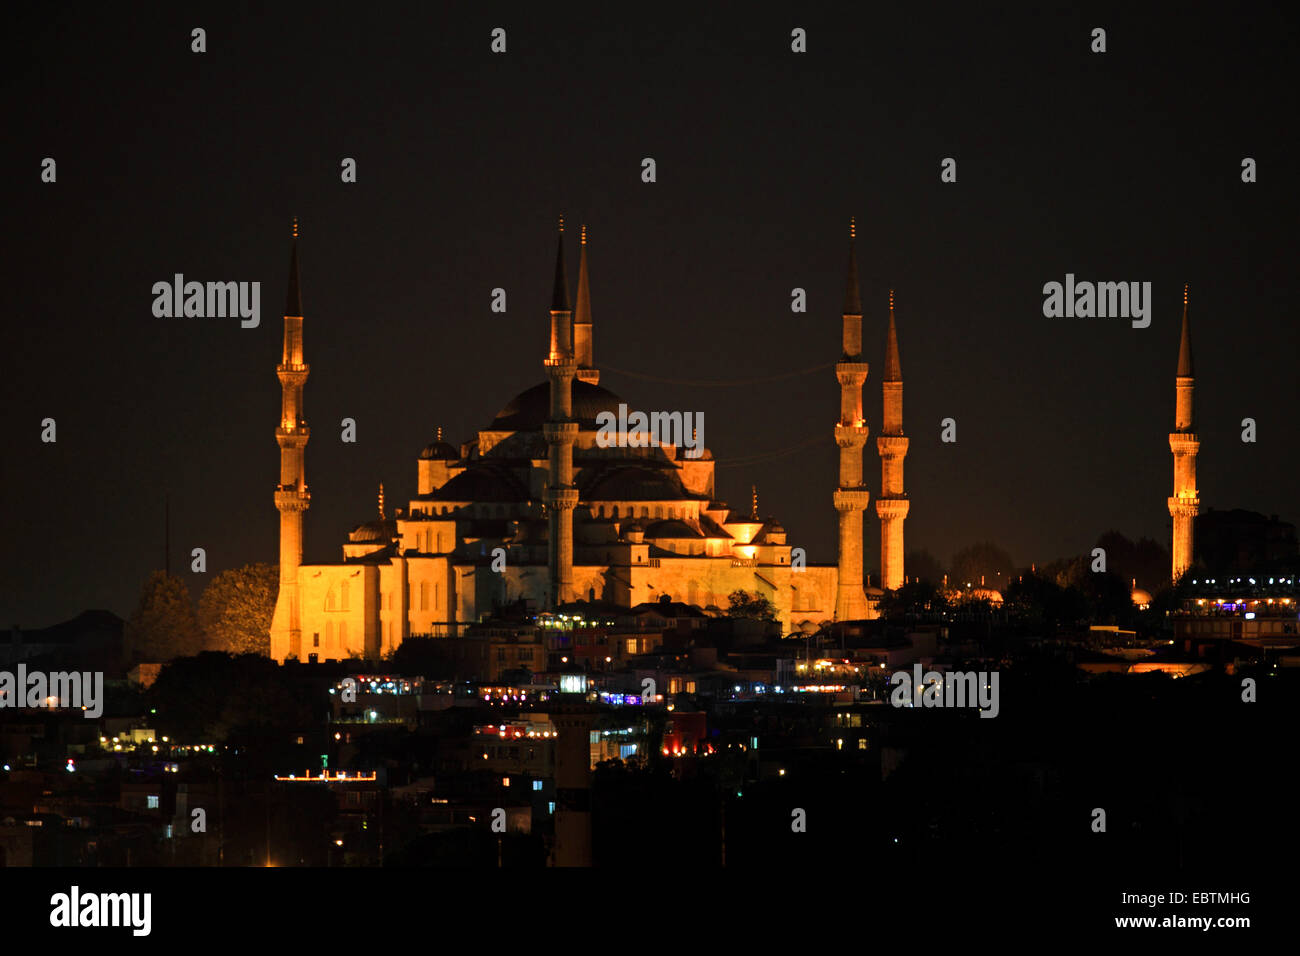 Sultan Ahmed Mosque, Blue Mosque at night, Turkey, Istanbul Stock Photo